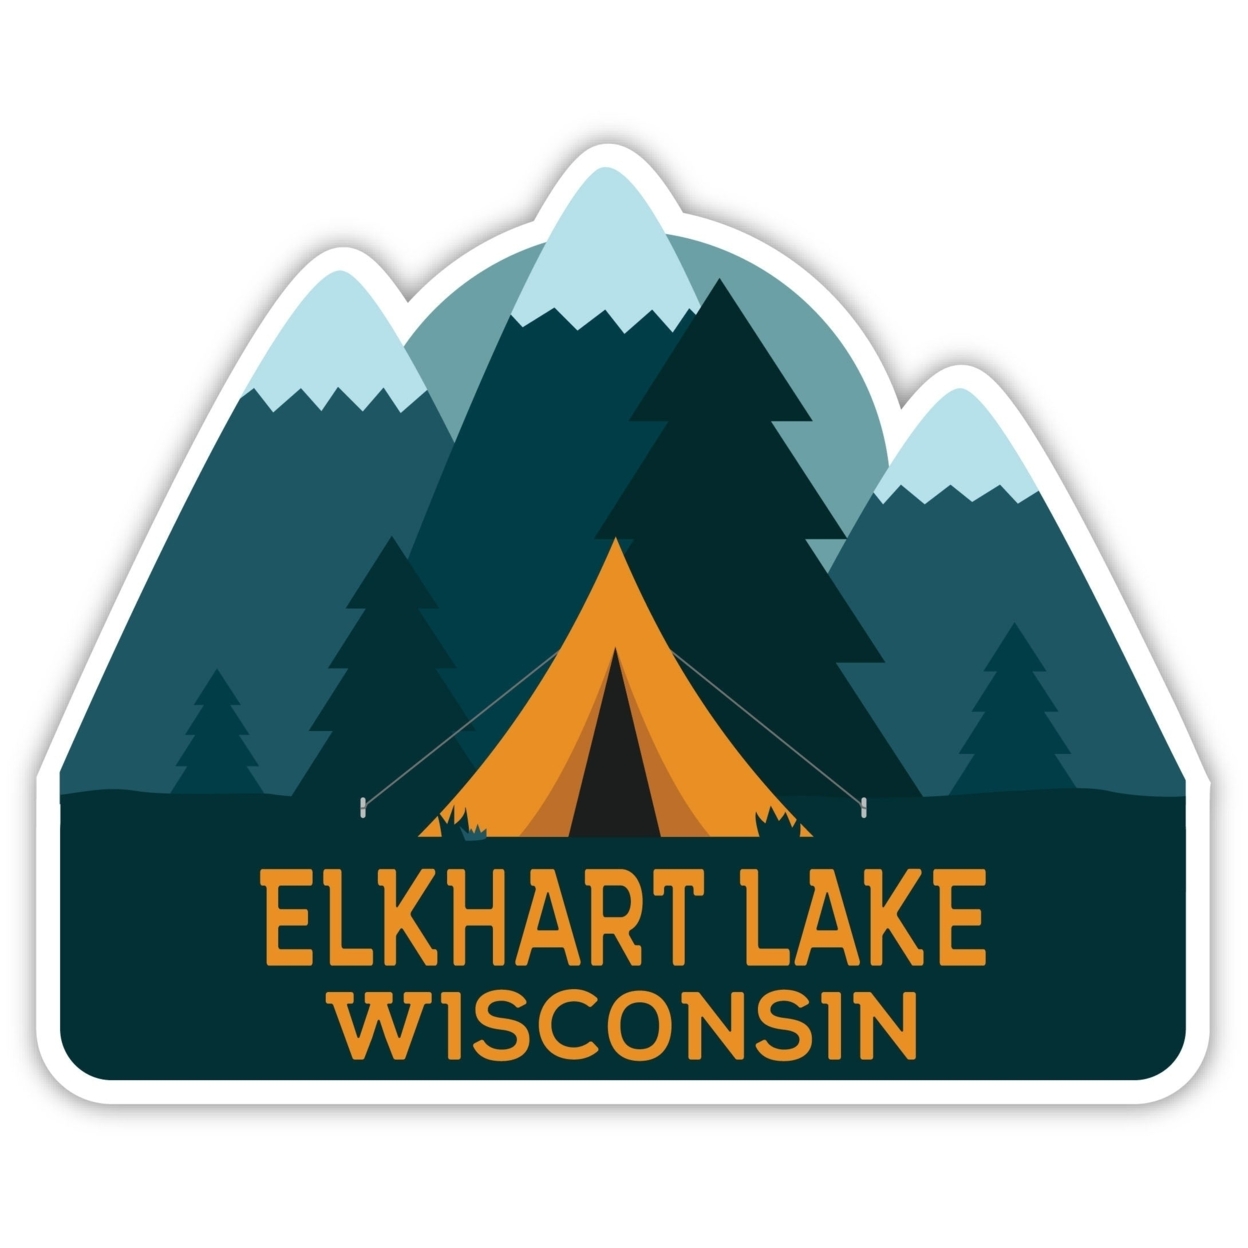 Elkhart Lake Wisconsin Souvenir Decorative Stickers (Choose Theme And Size) - 4-Pack, 4-Inch, Tent